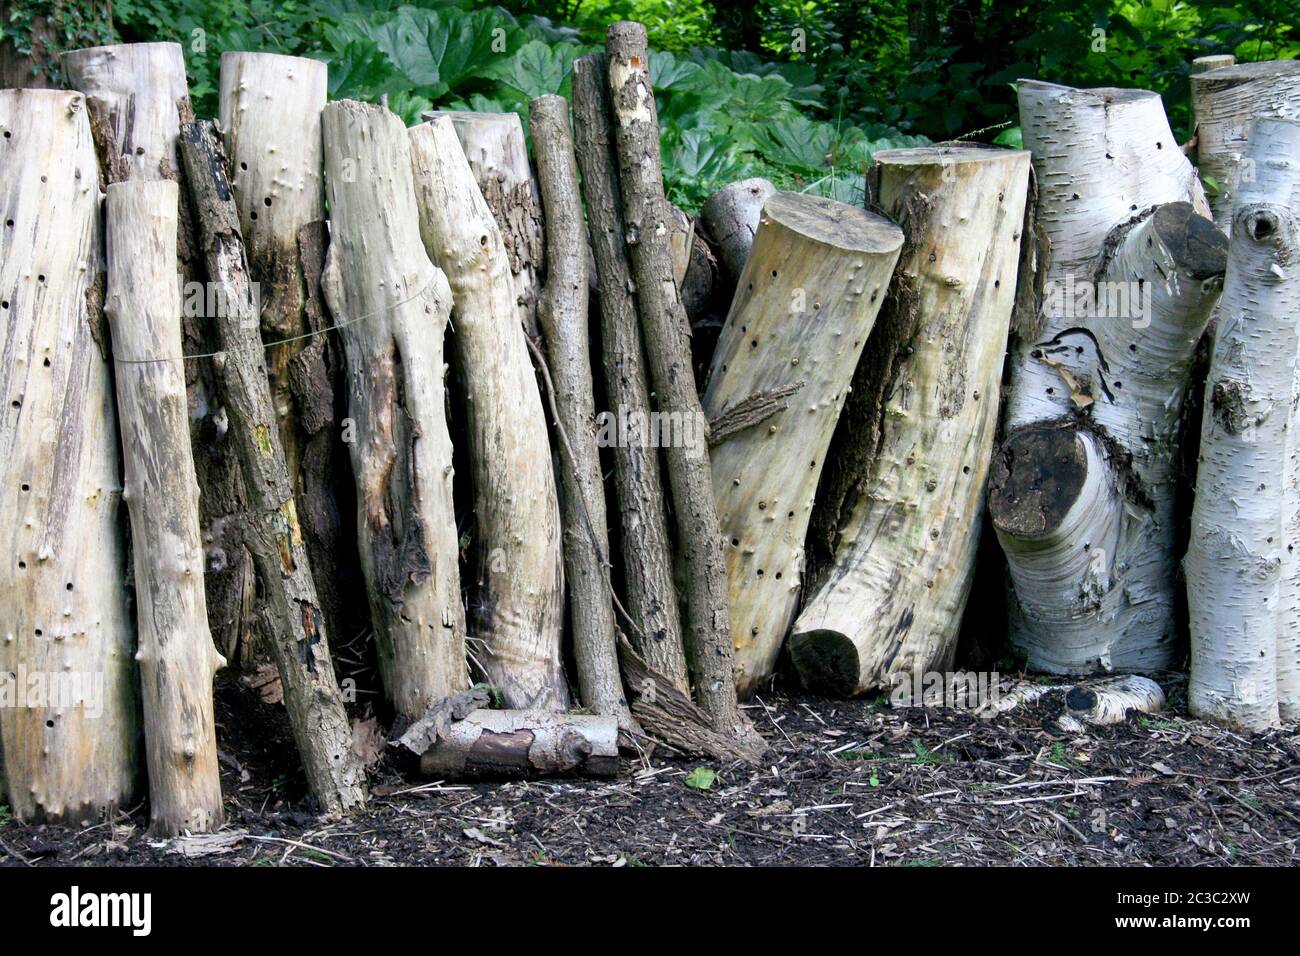 Some larger number of stored standing tree trunks Stock Photo